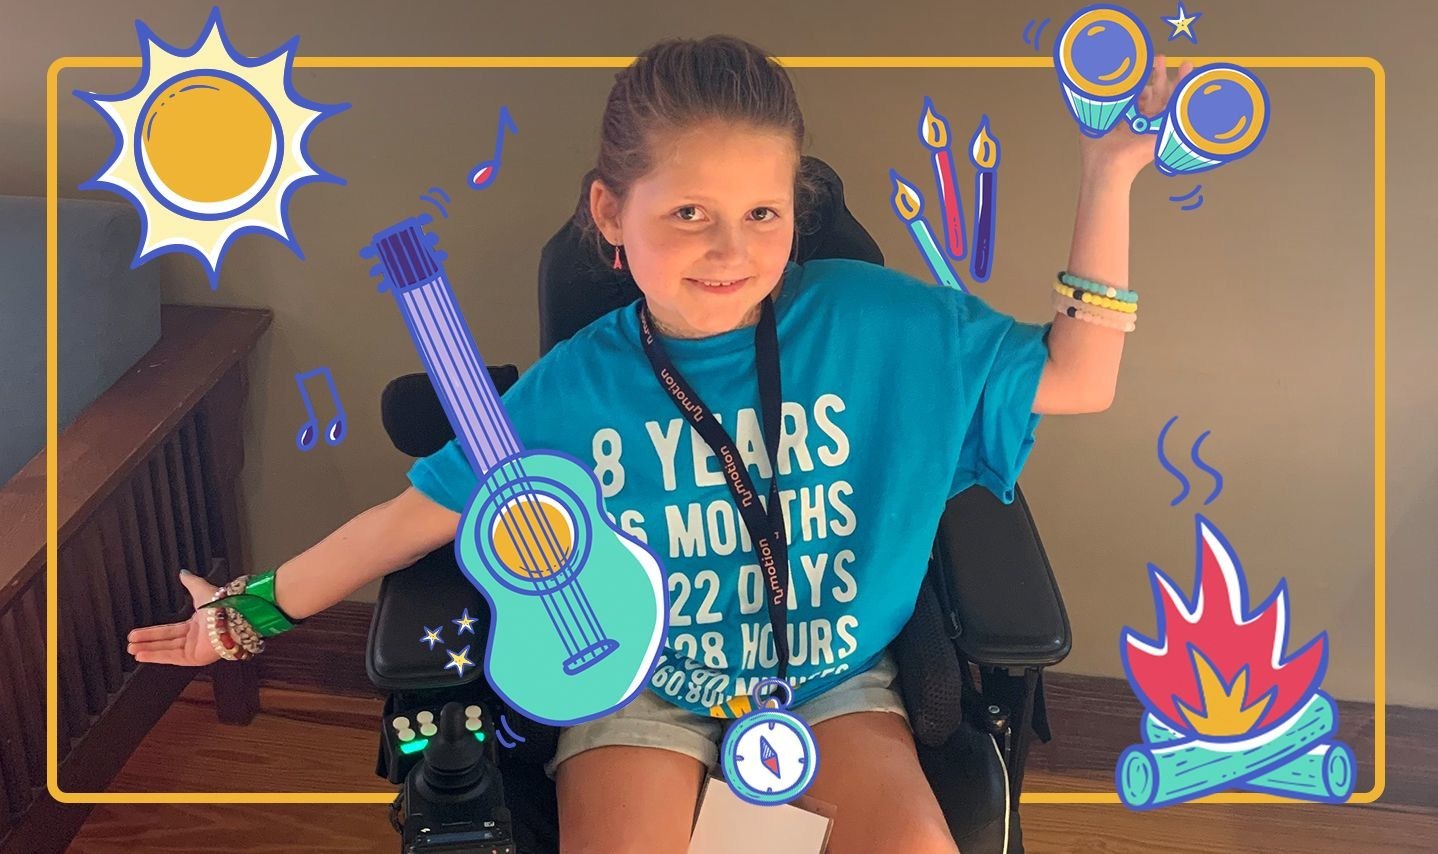 Registration is now open for the Muscular Dystrophy Association Virtual Summer Camp for children ages 8-17 at no cost to families - Adventure Awaits! mda.org/virtual-camp